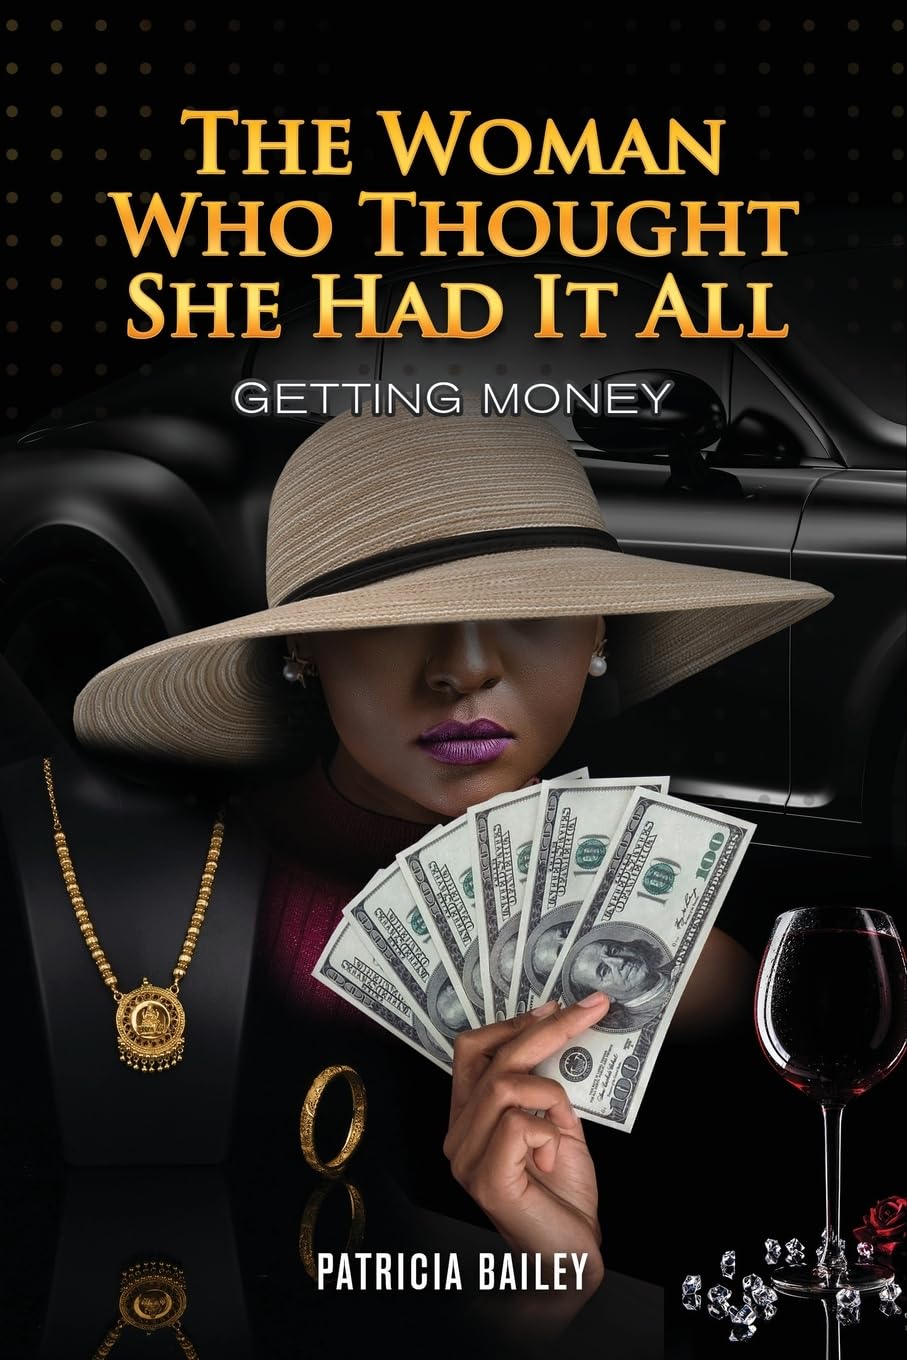 The Woman Who Thought She Had It All: Getting Money - CA Corrections Book Store